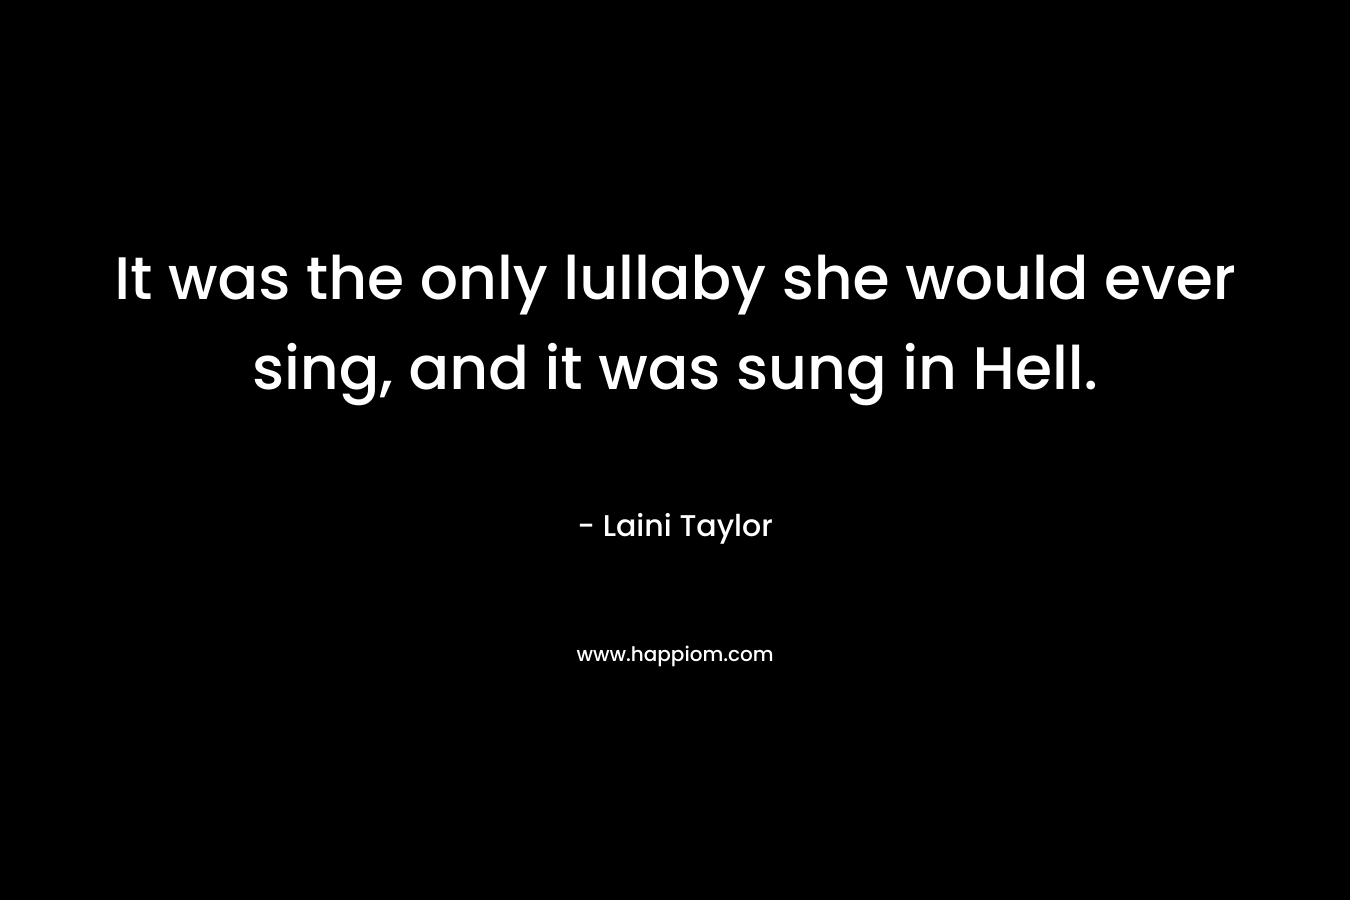 It was the only lullaby she would ever sing, and it was sung in Hell.